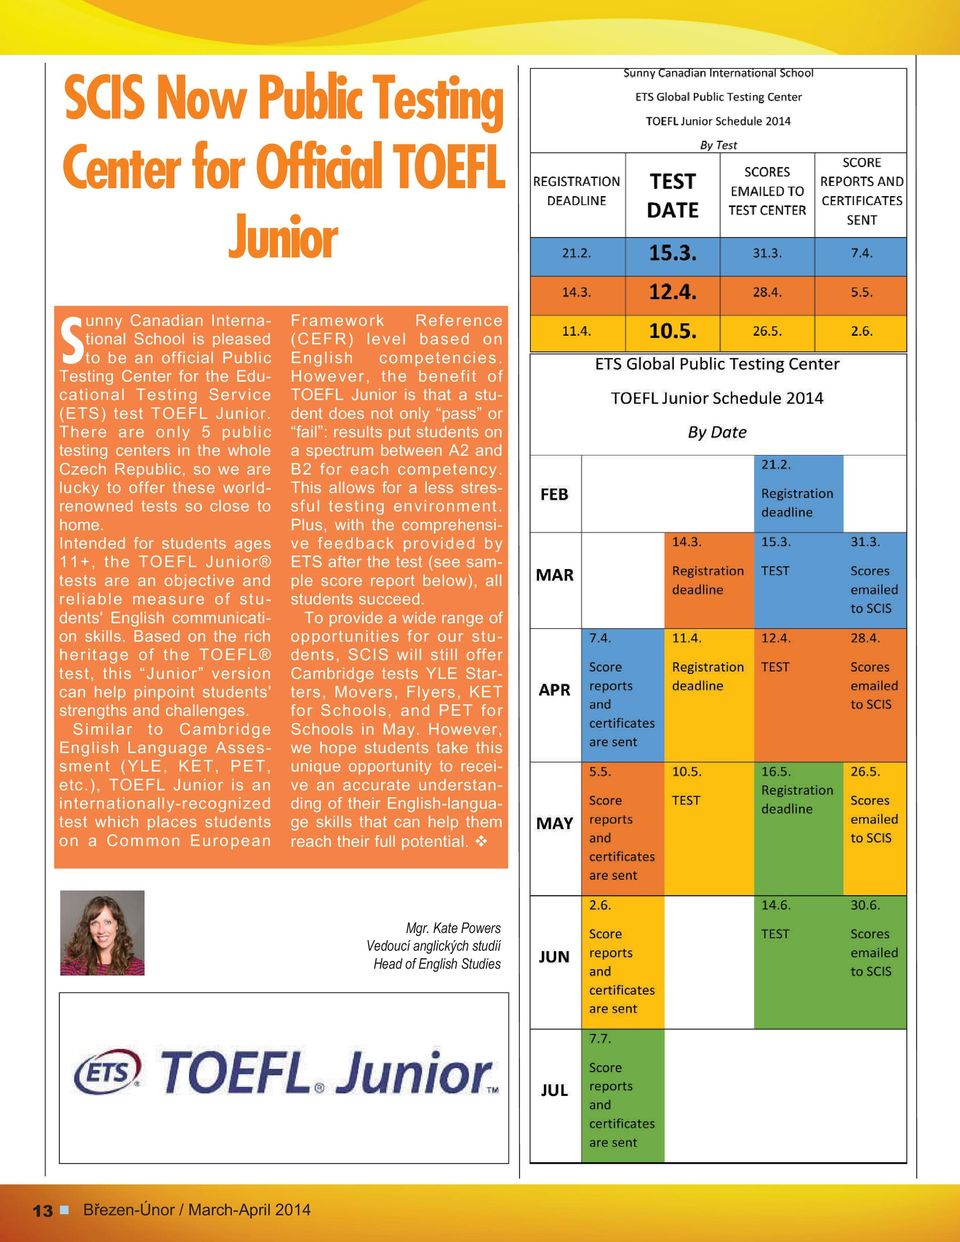 Intended for students ages 11+, the TOEFL Junior tests are an objective and reliable measure of students' English communication skills.